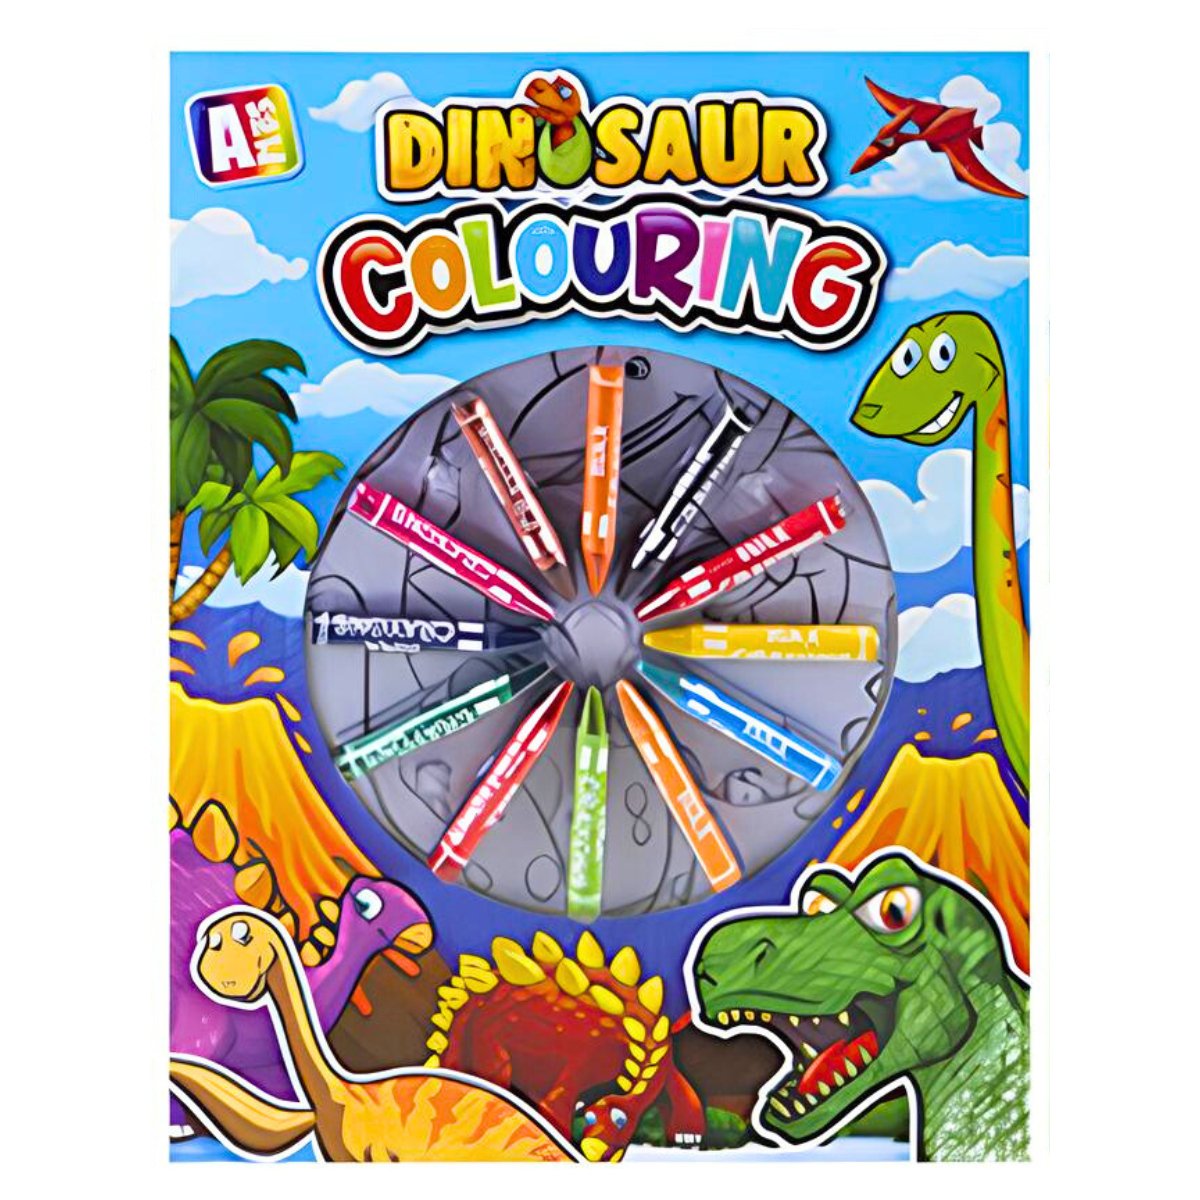 Dinosaur Colouring Book With 12 Wax Crayons - Kids Party Craft